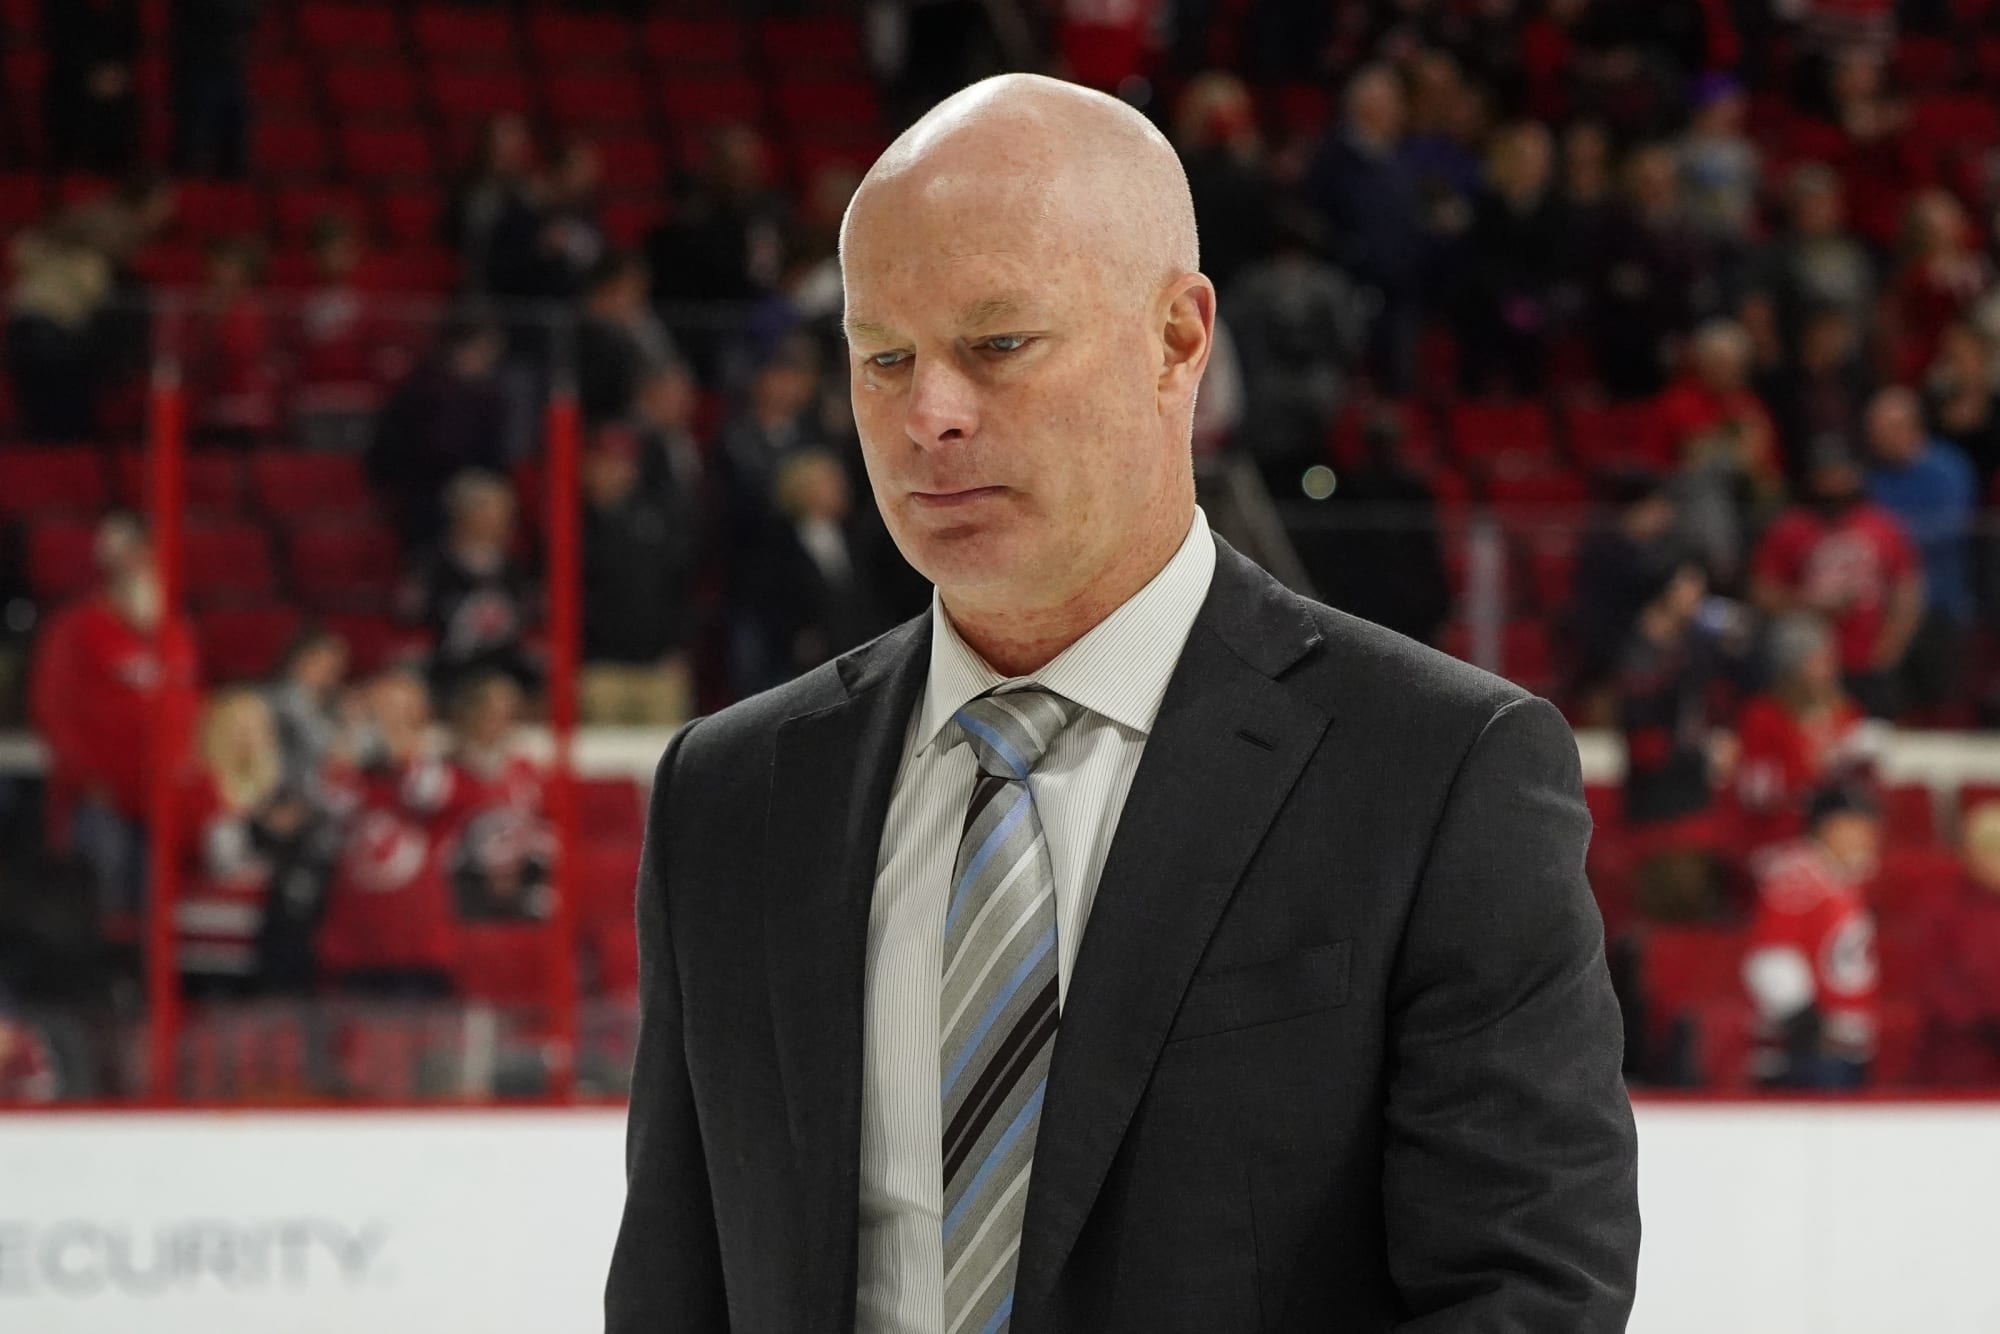 Coach John Hynes and rookie Pavel Zacha excited about Devils